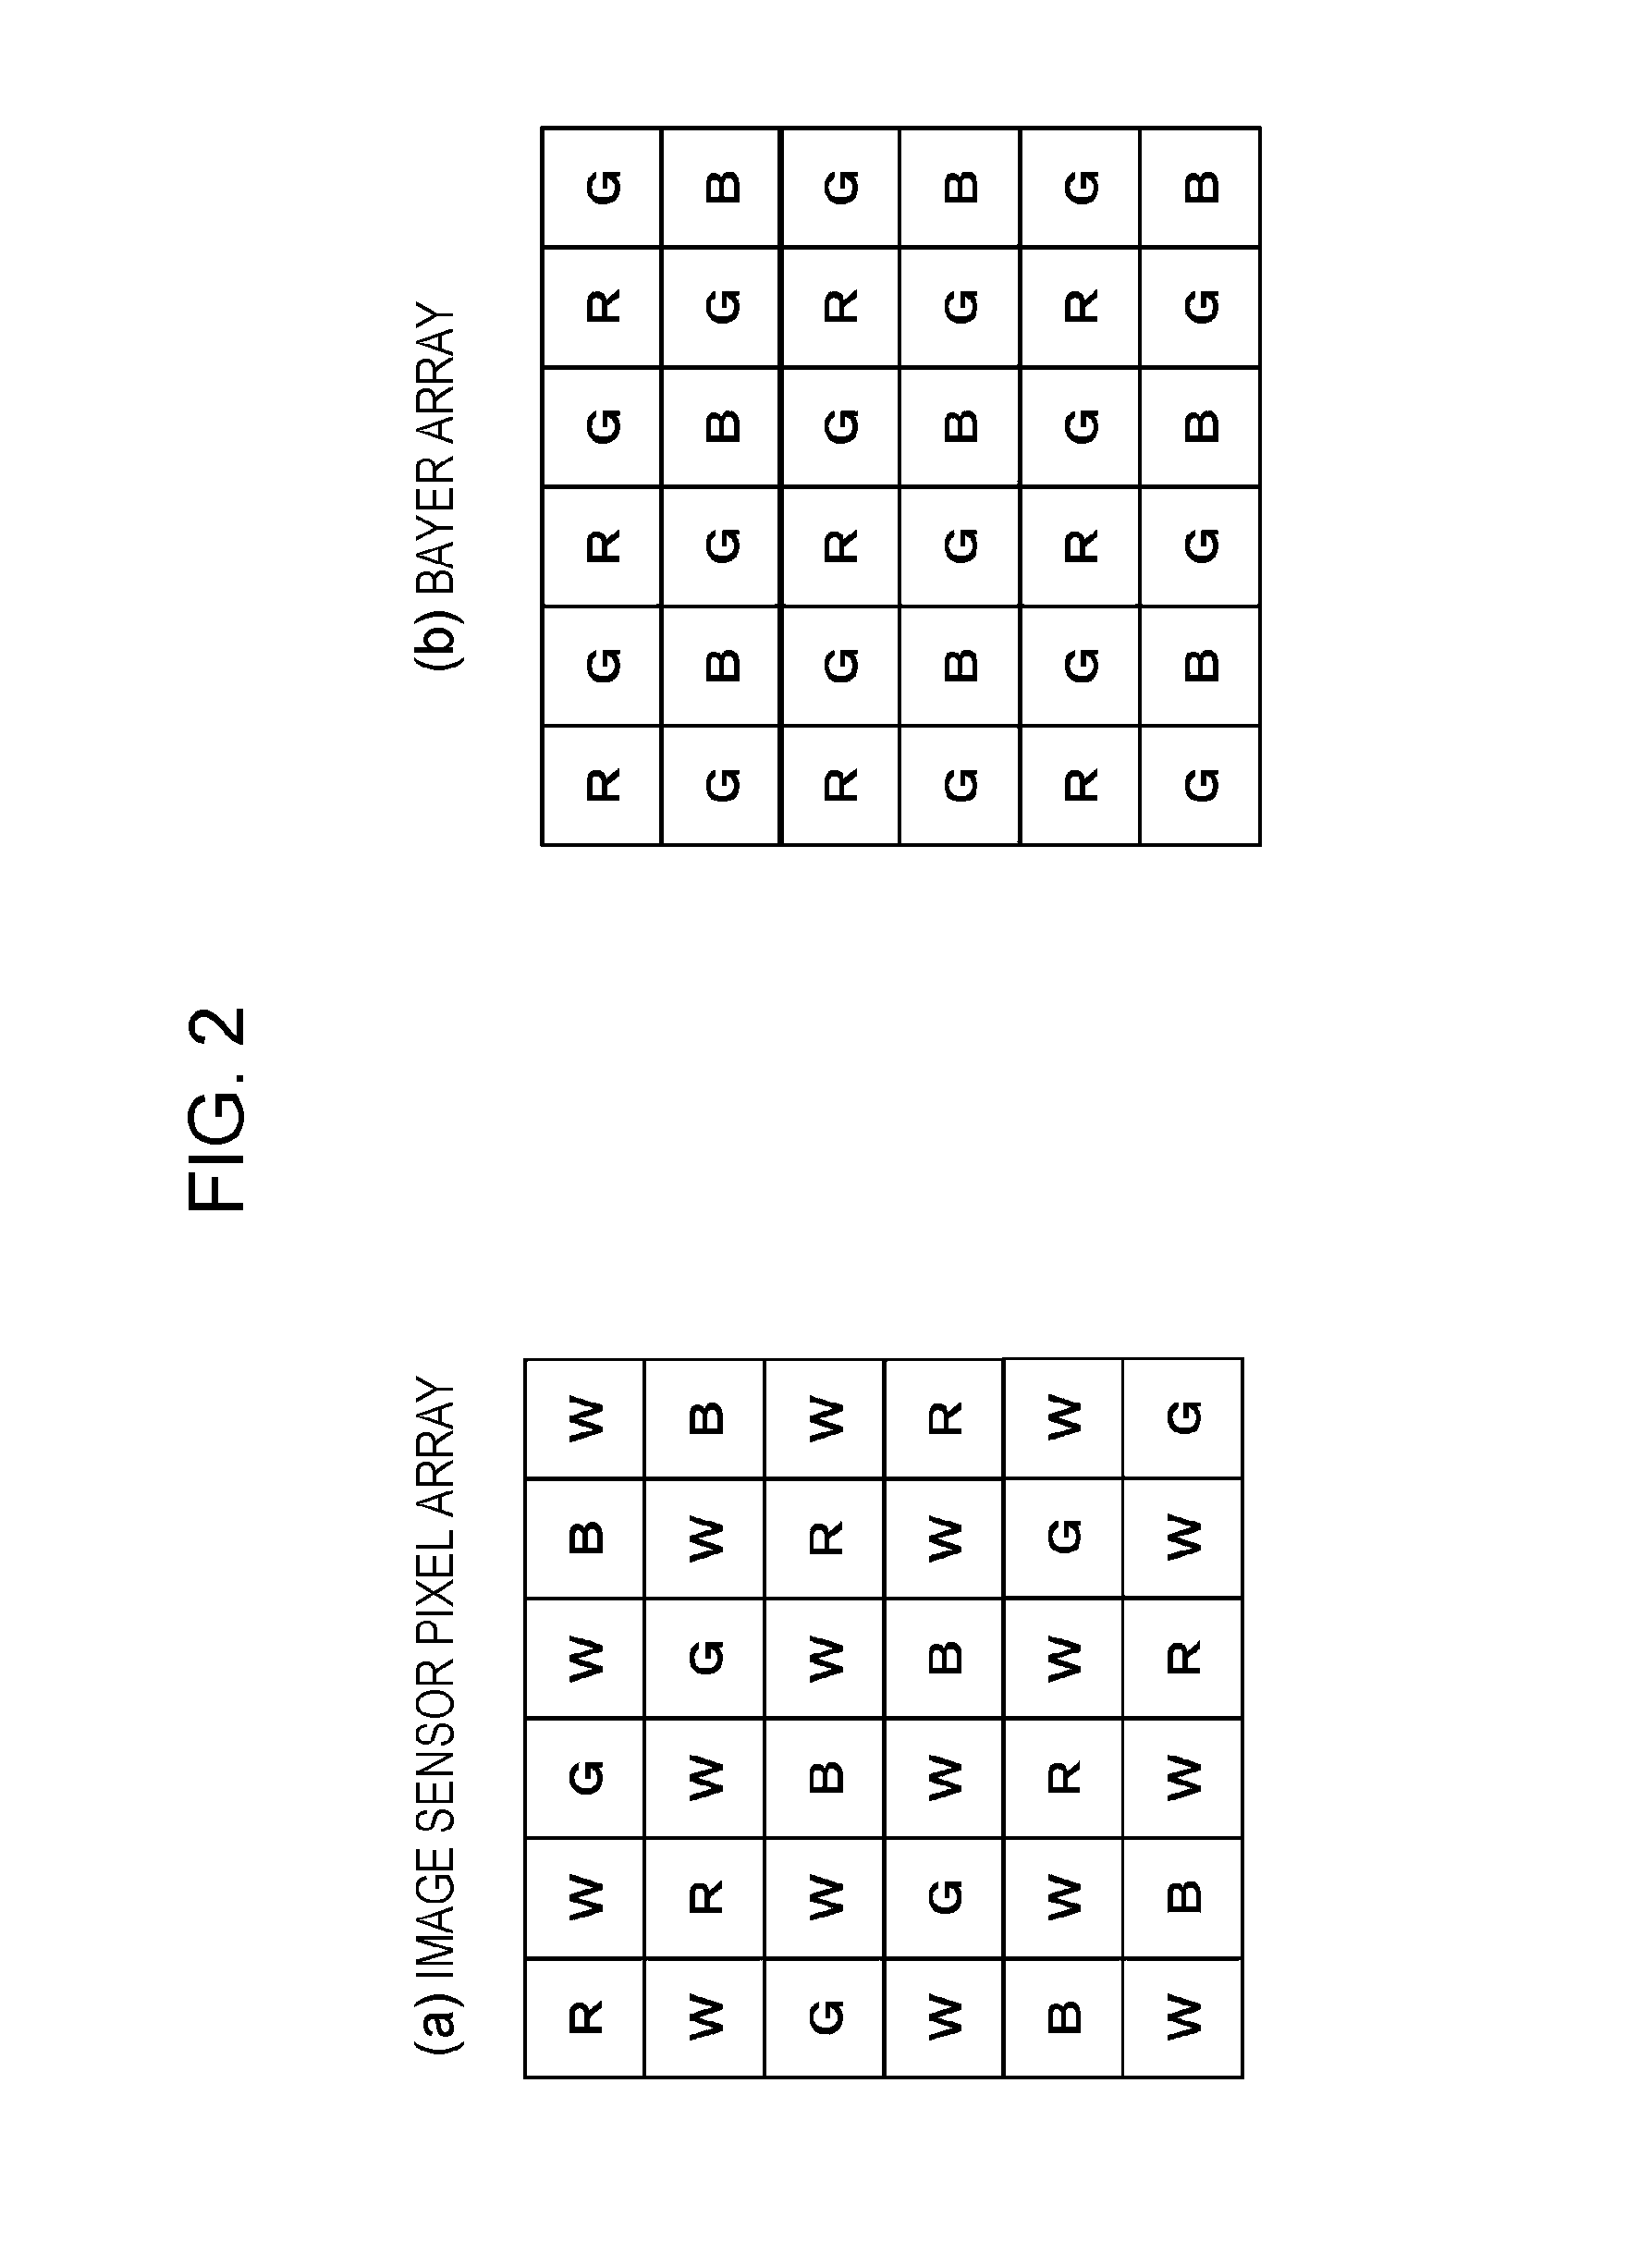 Image processing apparatus, imaging device, image processing method, and program